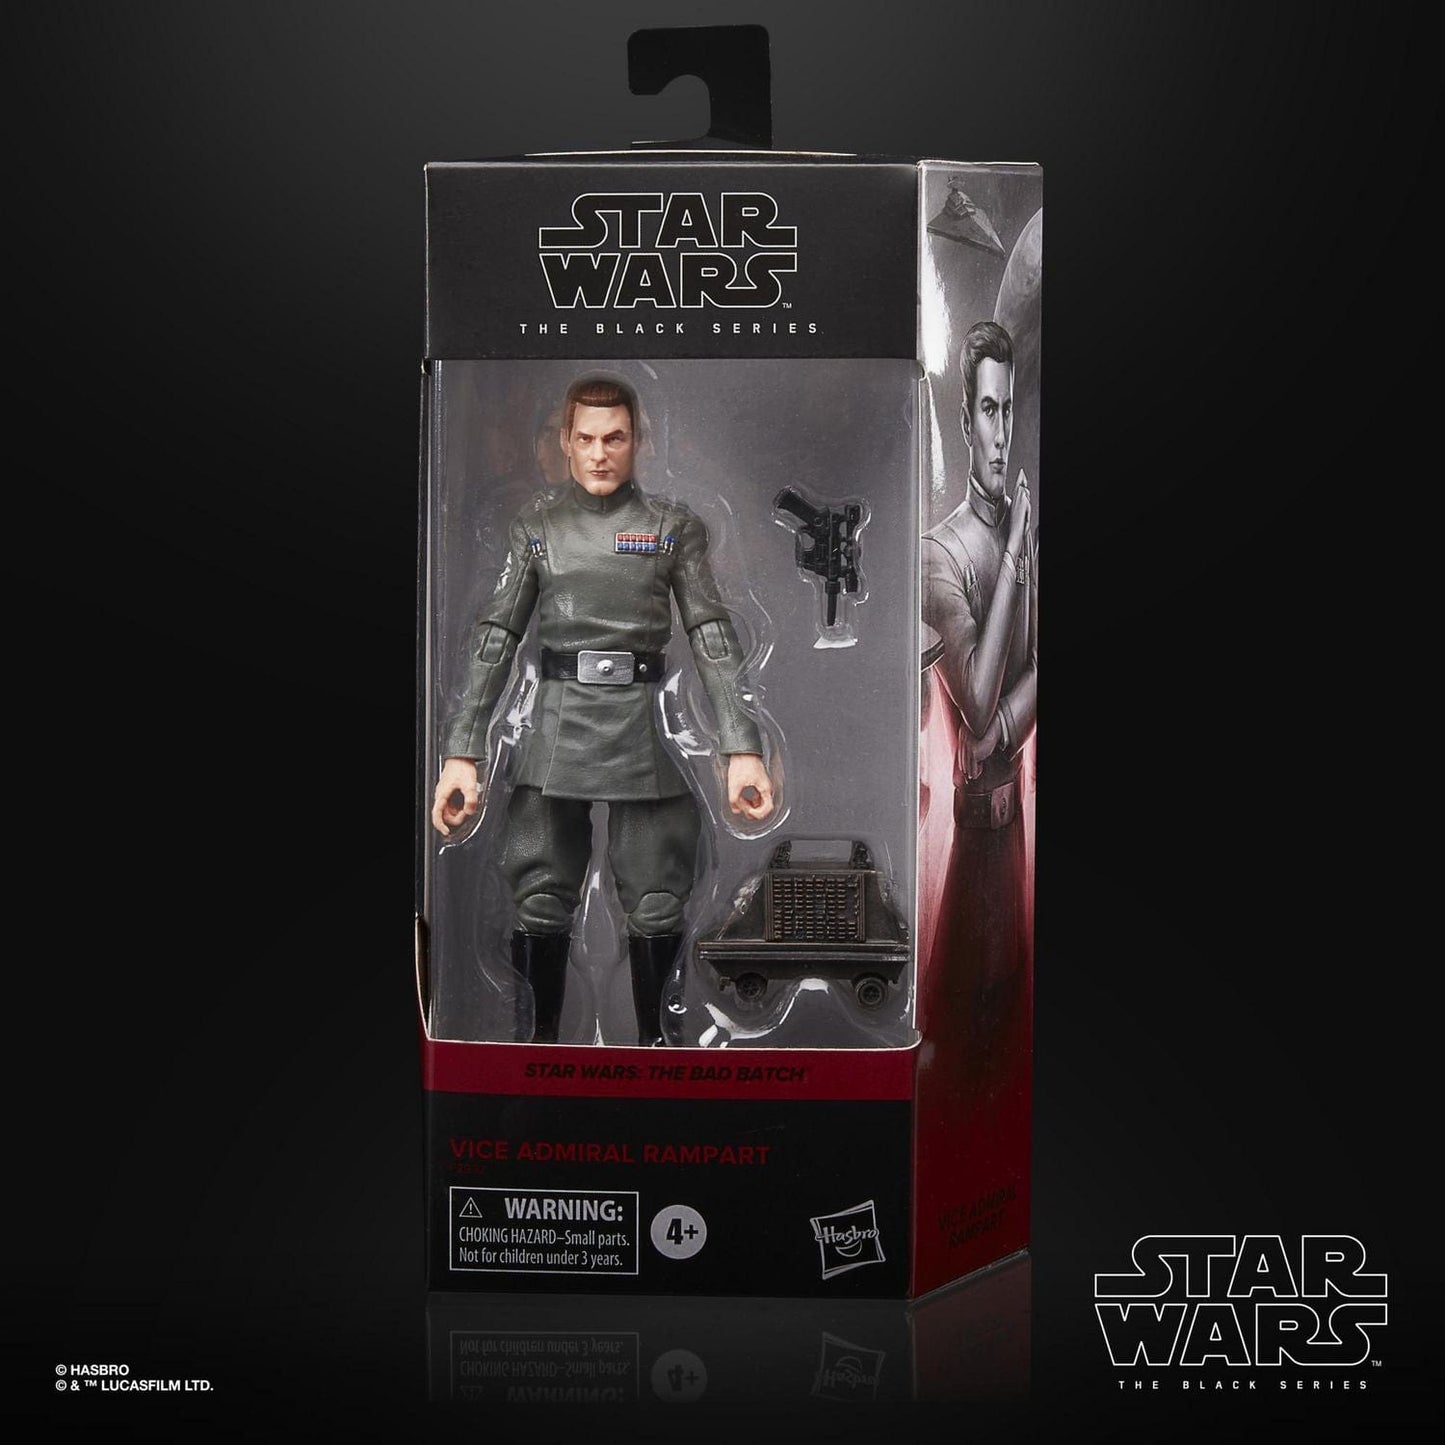 Star Wars The Black Series Vice Admiral Rampart Toy 6-Inch-Scale Star Wars: The Bad Batch Collectible Action Figure - 3